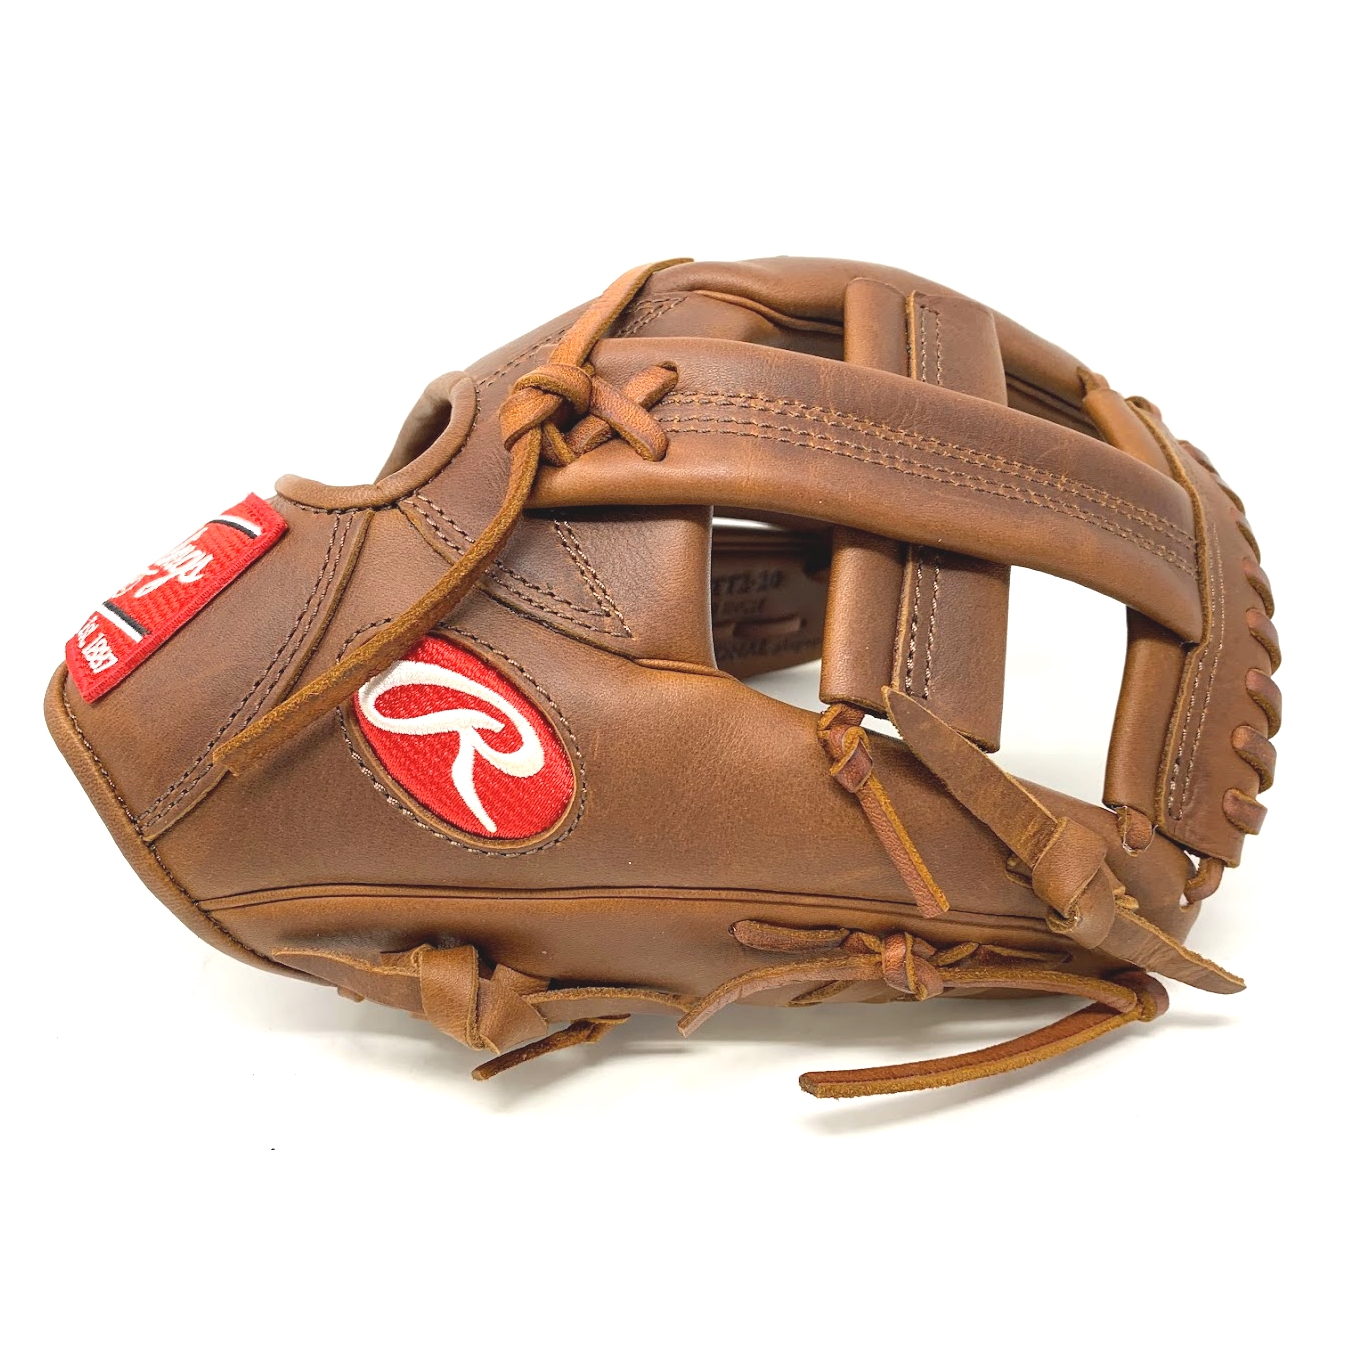 Improve your game with the Rawlings Heart of the Hide TT2 11.5 Inch infield glove from ballgloves.com and Don Morton Sports. Show off your unique style with this high-quality glove crafted from ultra-premium steer-hide leather and featuring the popular TT2 pattern. The wide, shallow pocket design allows for quick and easy transfers.   Pattern: TT2Sport: BaseballLeather: Heart of the HideFit: StandardThrowing Hand: Right-Hand ThrowPosition: InfieldSize: 11 1/2Web: Single PostColor: TimberglazeLogo: PatchLaces: TimberglazeNo Palm PadWrist Lining: Thermo FormedBreak-In: Standard